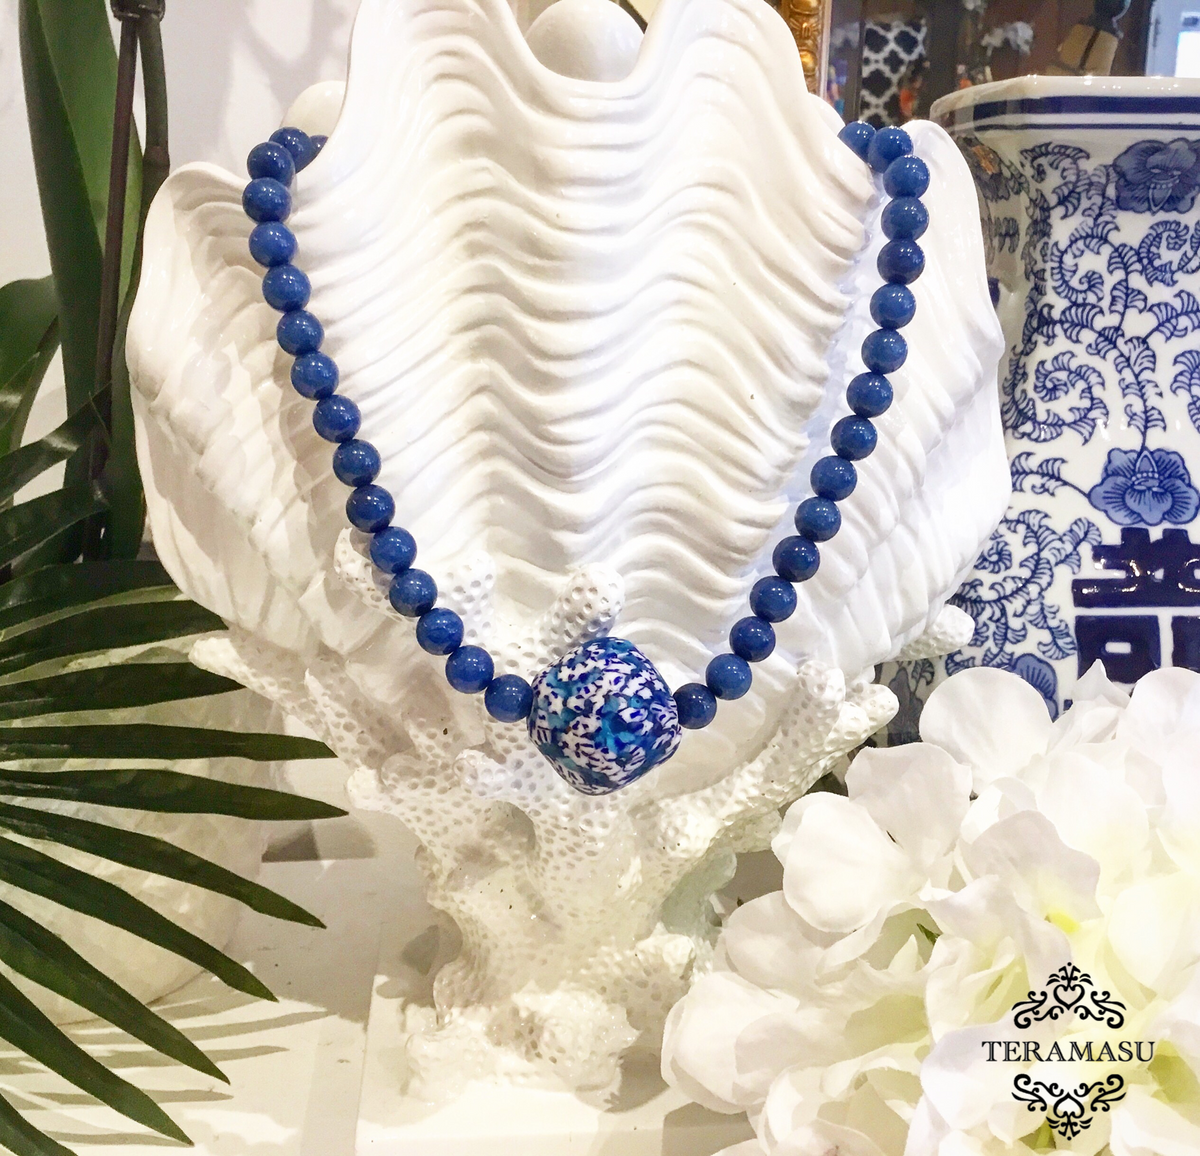 Chic Peek: Handmade Designer Teramasu Sodalite and One-of-a-Kind Hand-painted Tumbled Glass Necklace